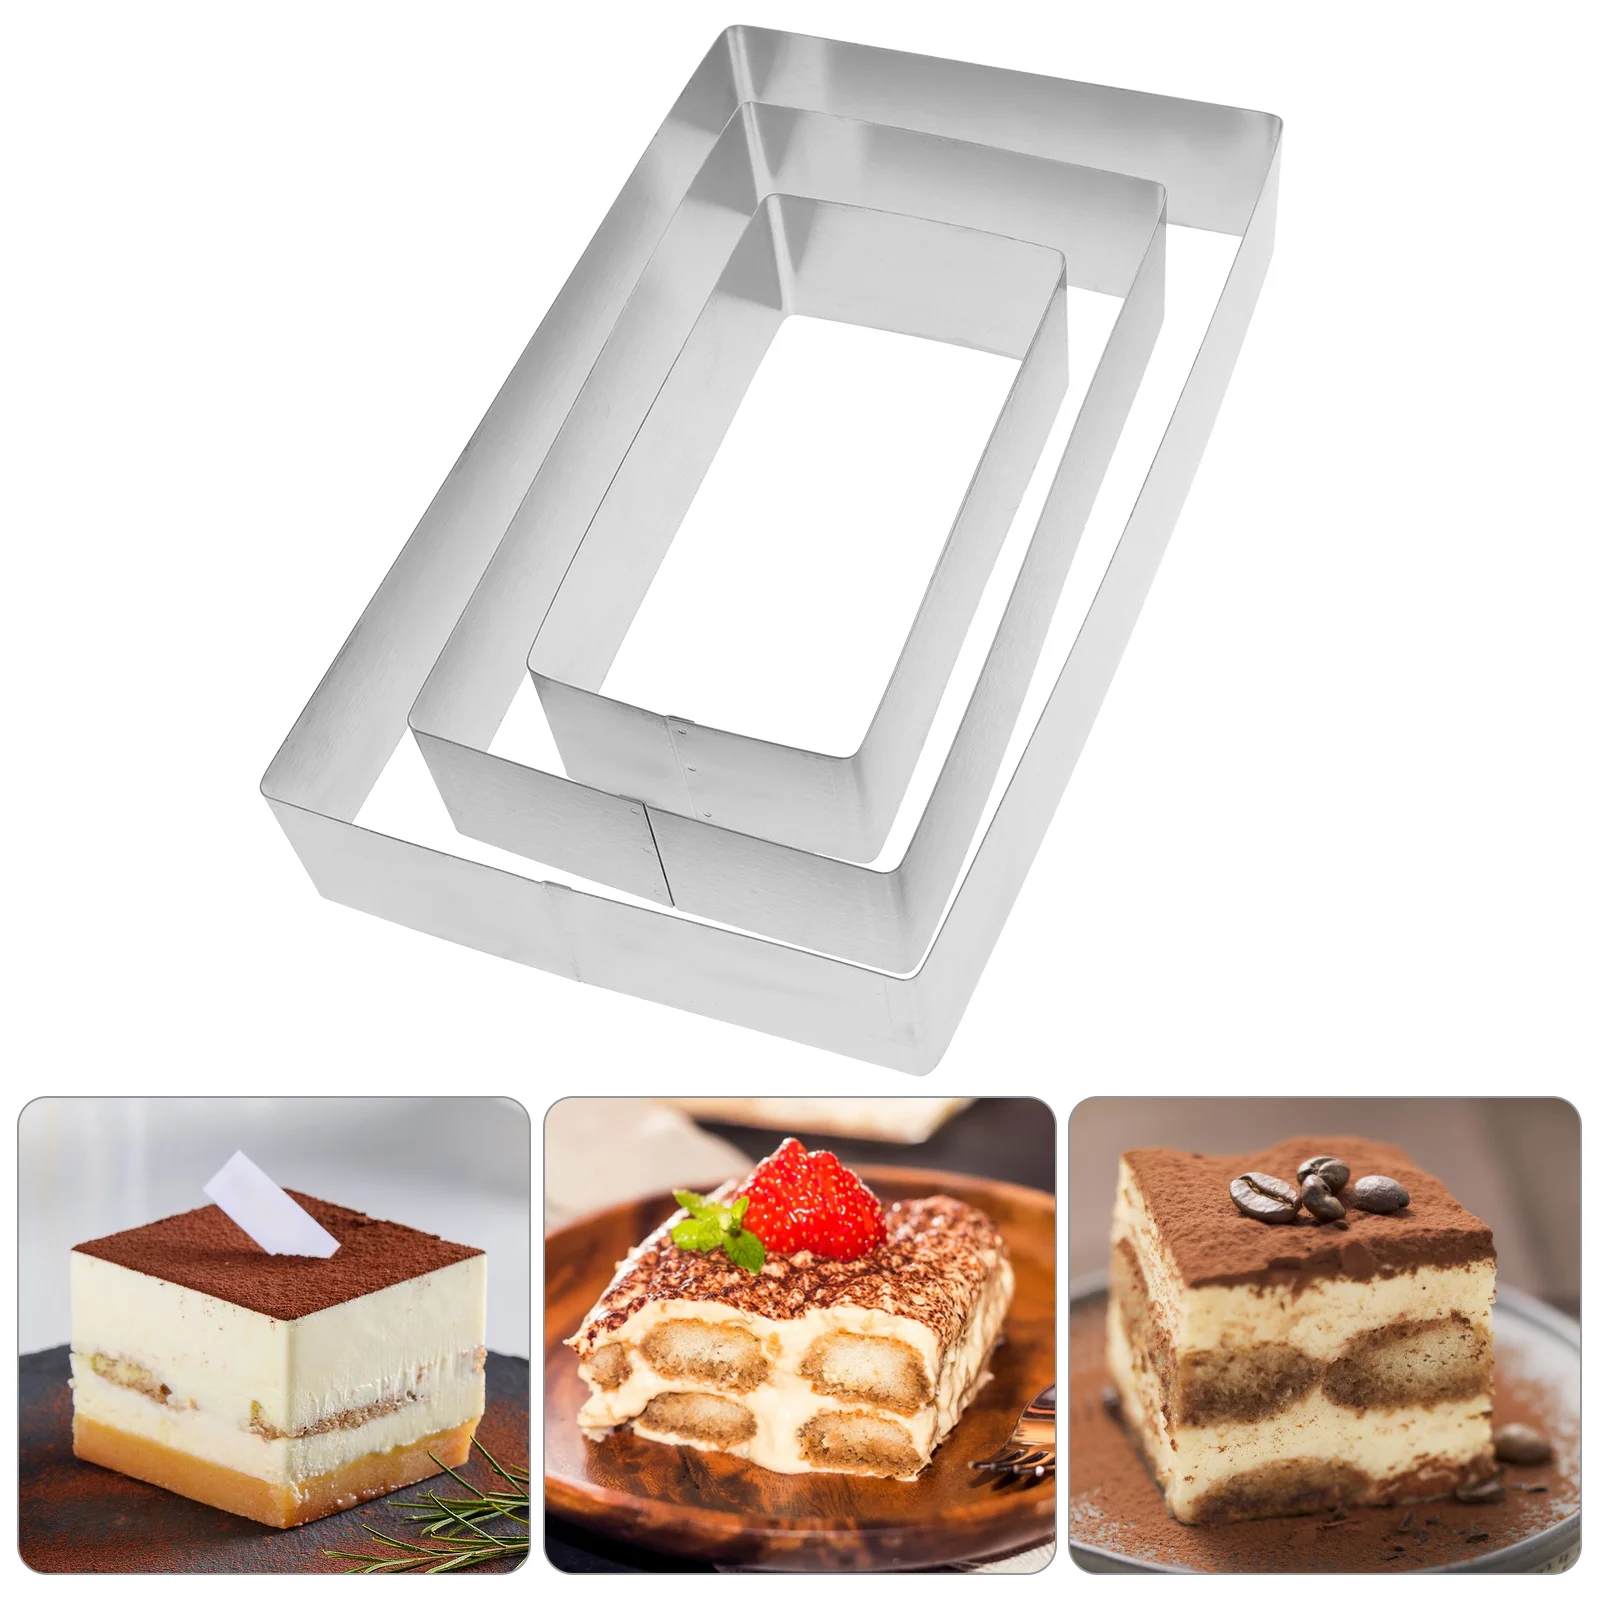 

3 Mousse Cake Mold Ring Stainless Steel Tiramisu Cheese Pie Pastry Rectangular Dessert Tool for Home Kitchen Silicone